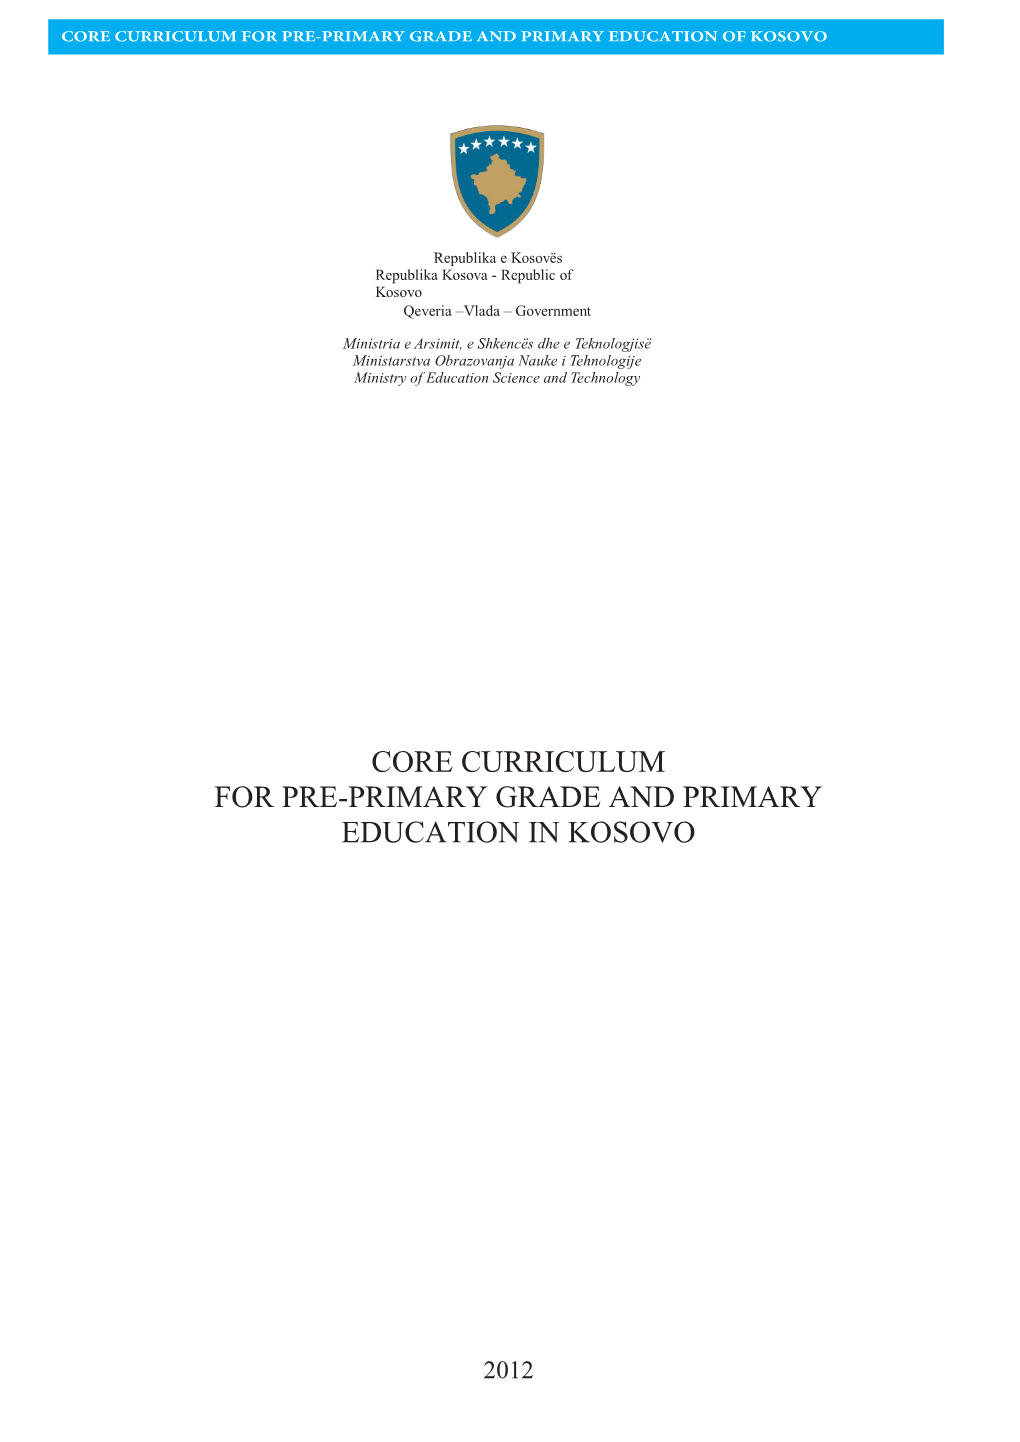 Core Curriculum for Pre-Primary Grade and Primary Education of Kosovo